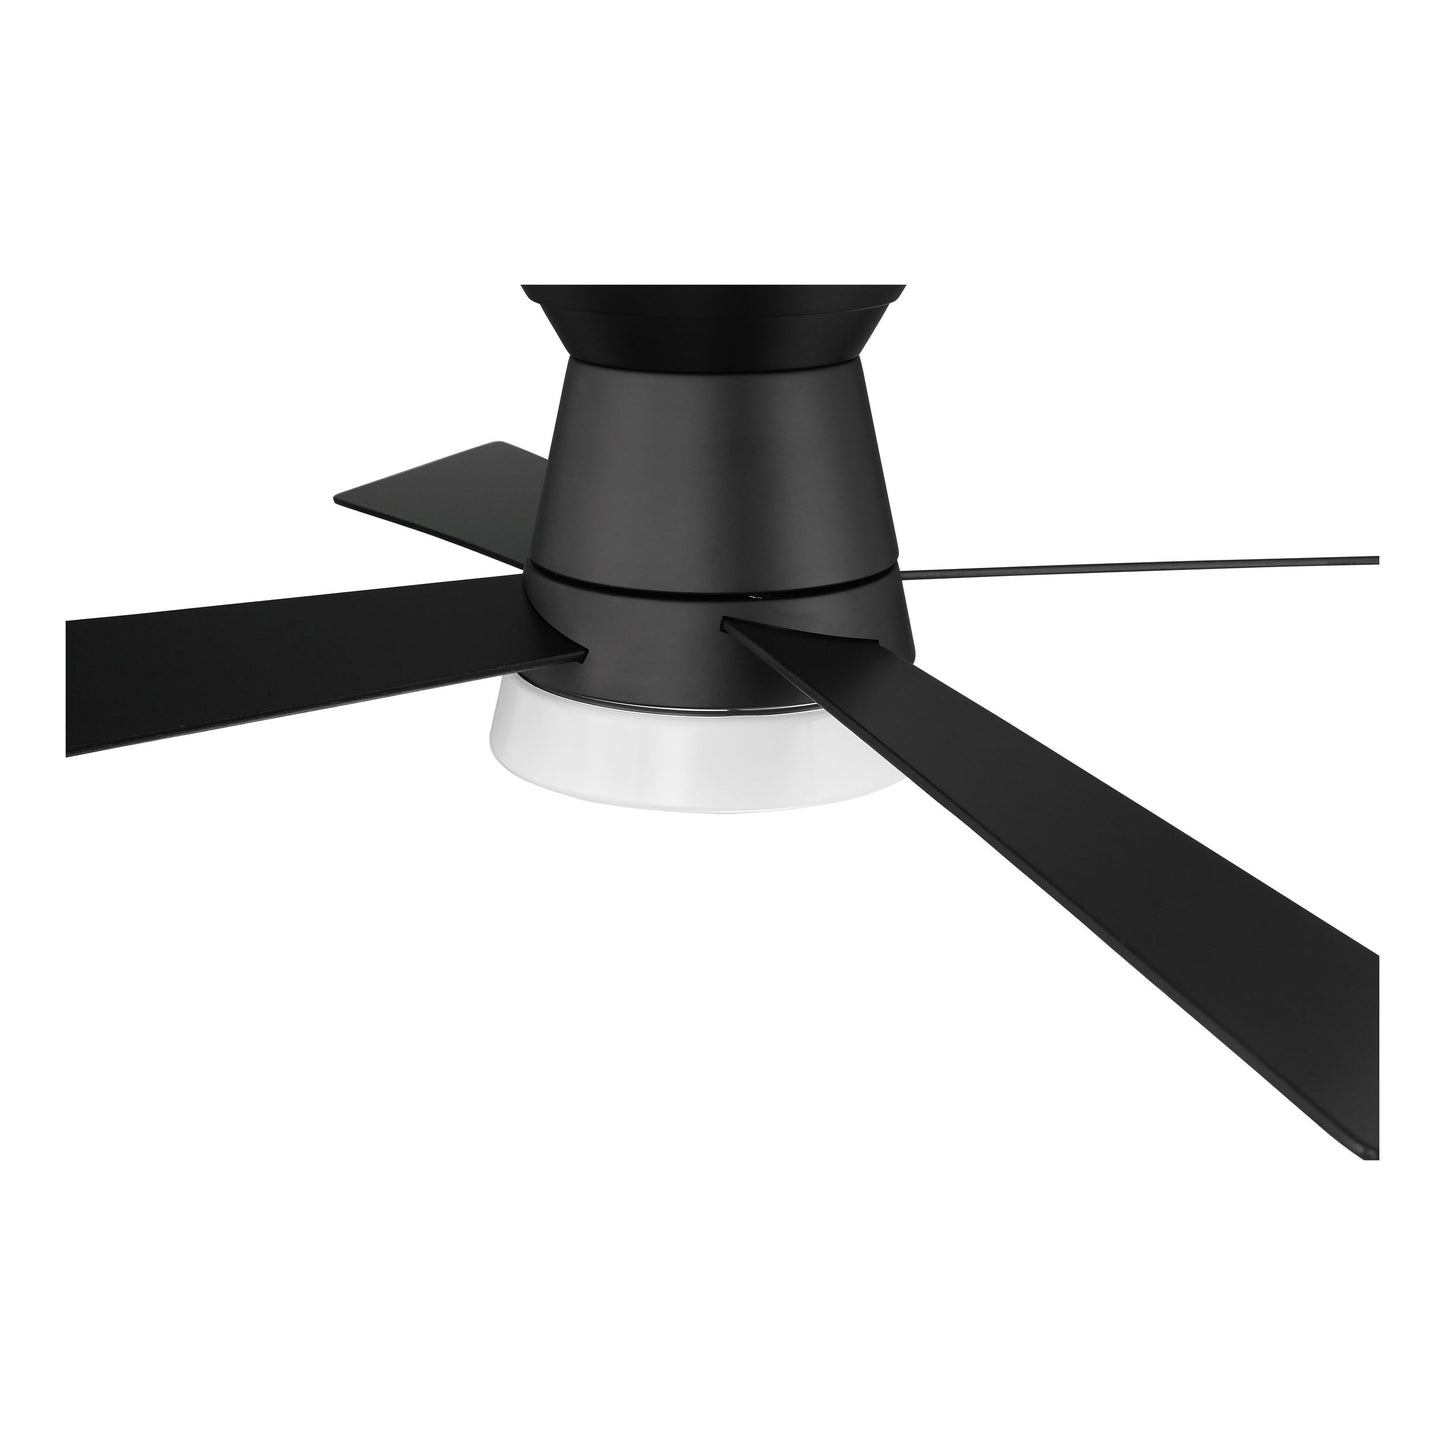 REV52FB4 - Revello 52" 4 Blade Ceiling Fan with Light Kit - Remote & Wall Control - Flat Black